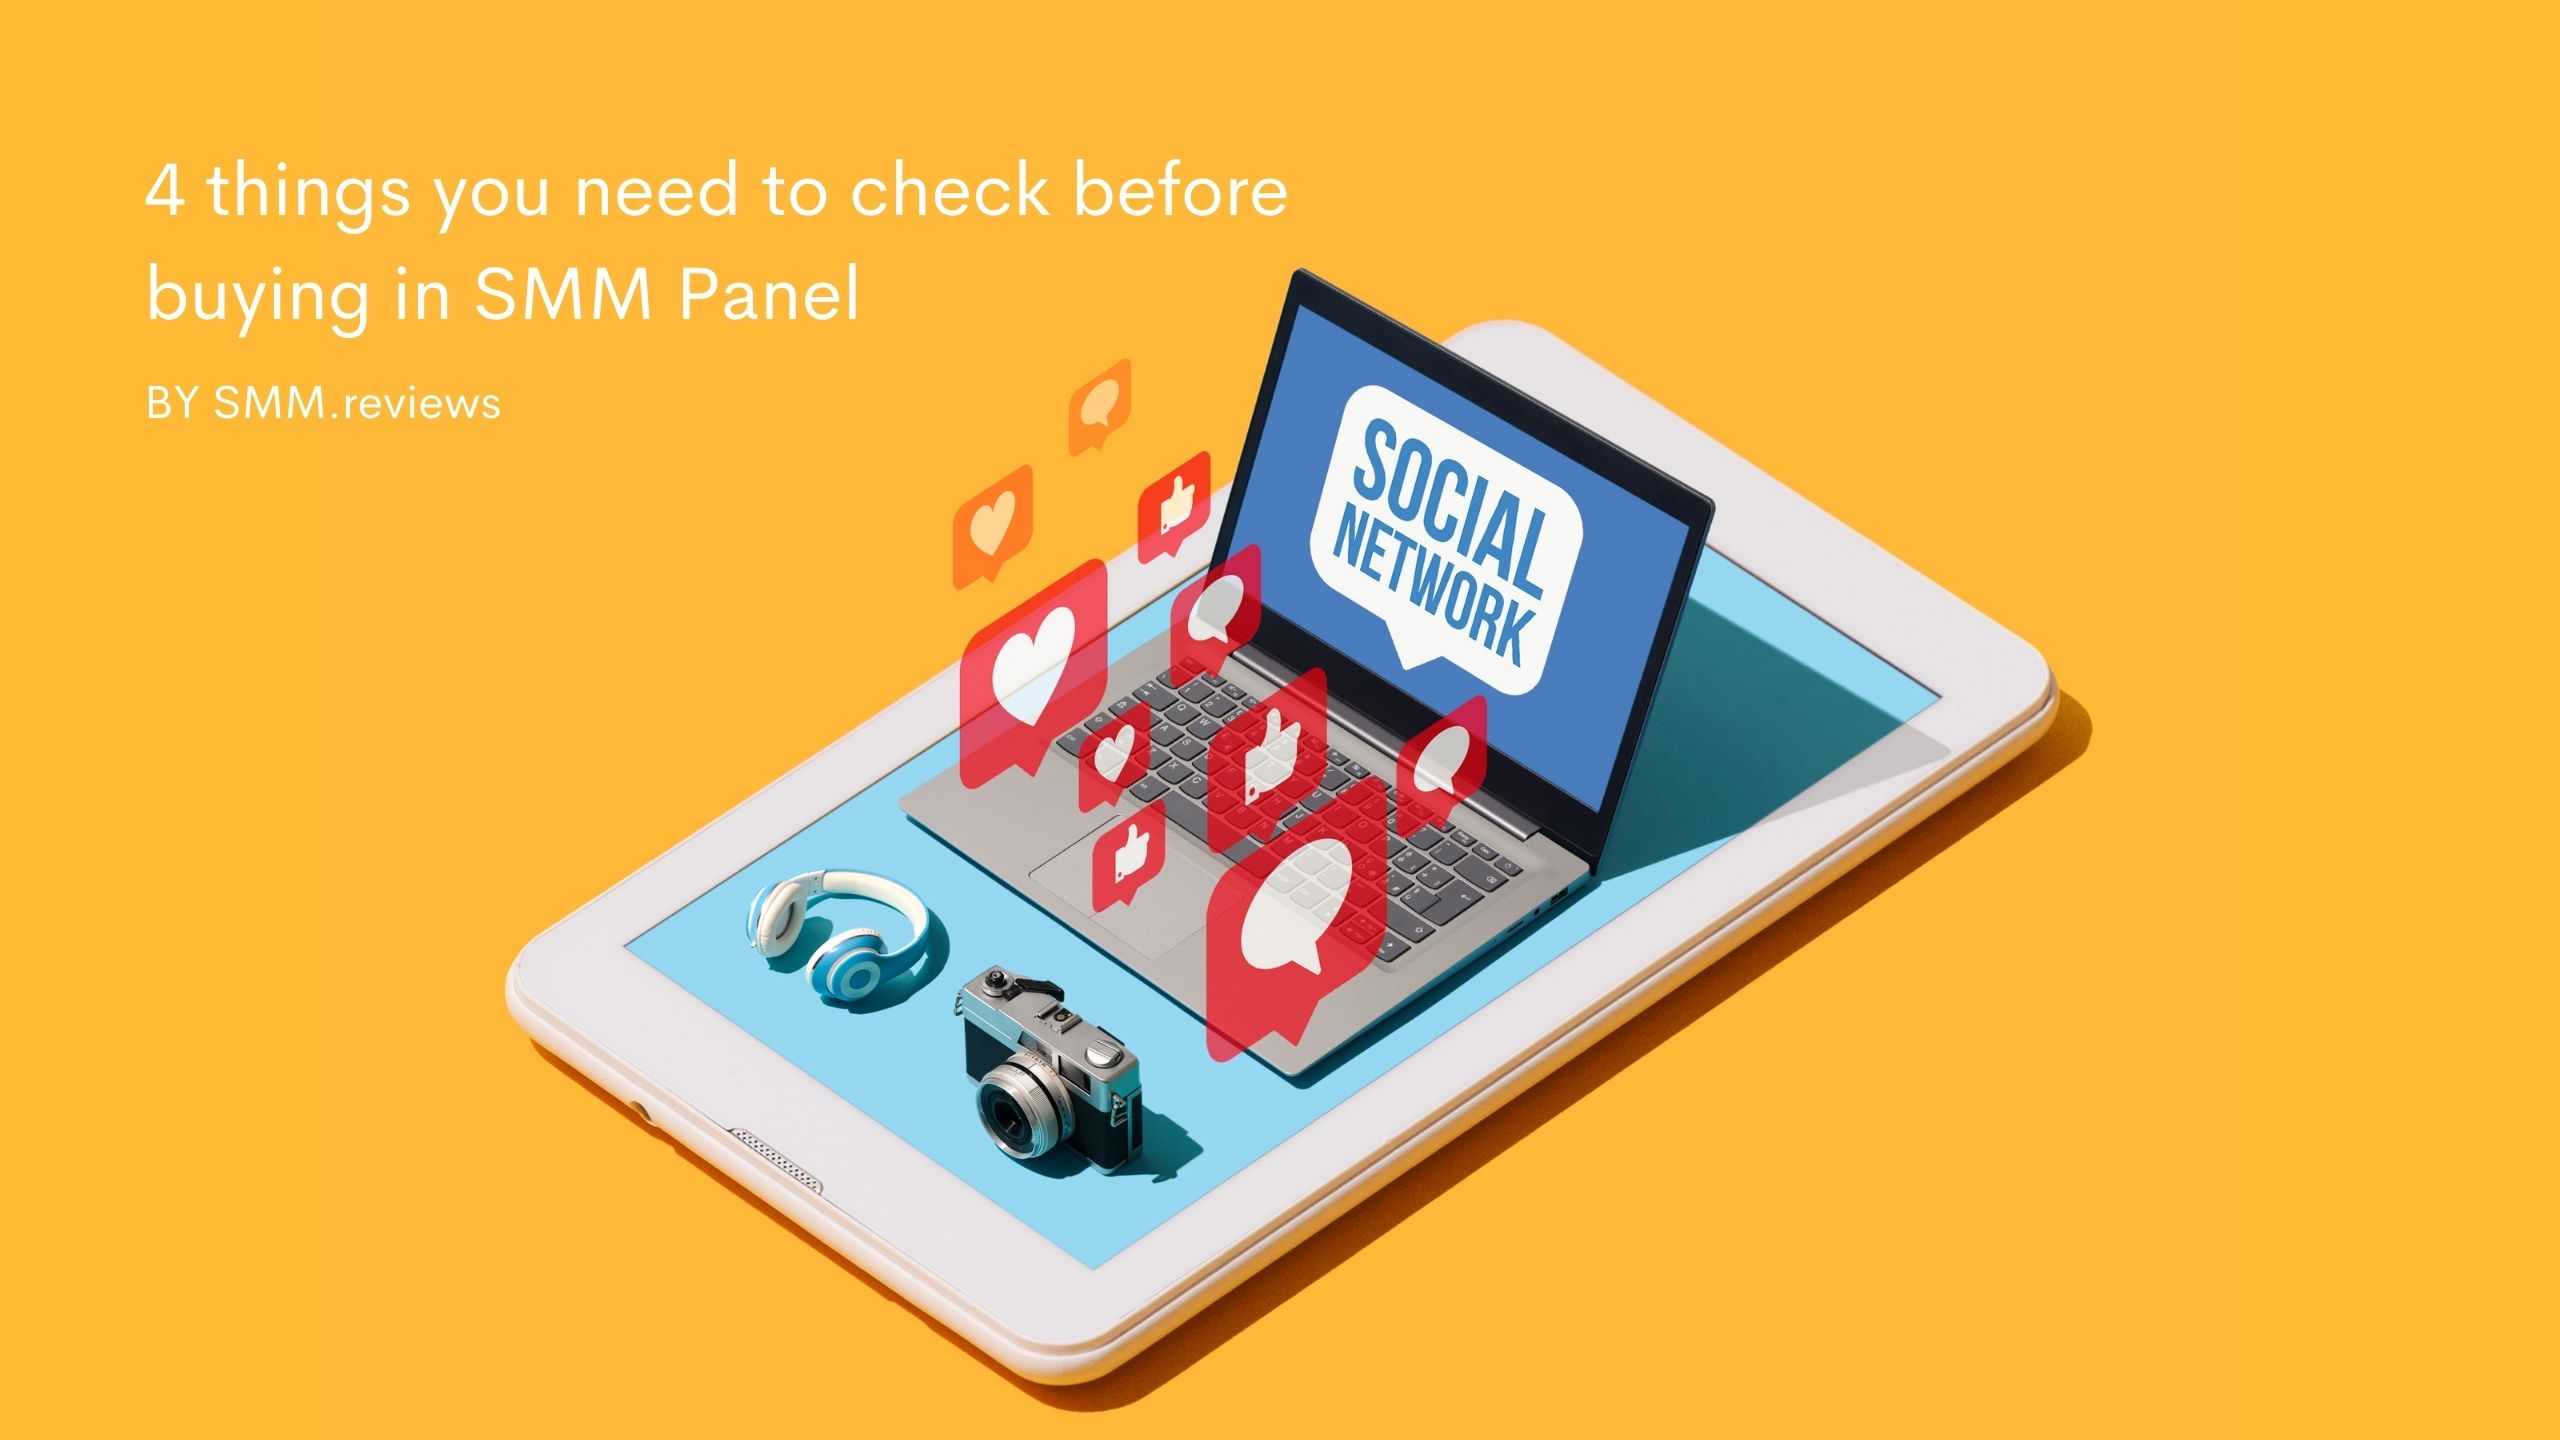 Recommend a Panel to review 4 things you need to check before buying in SMM Panel